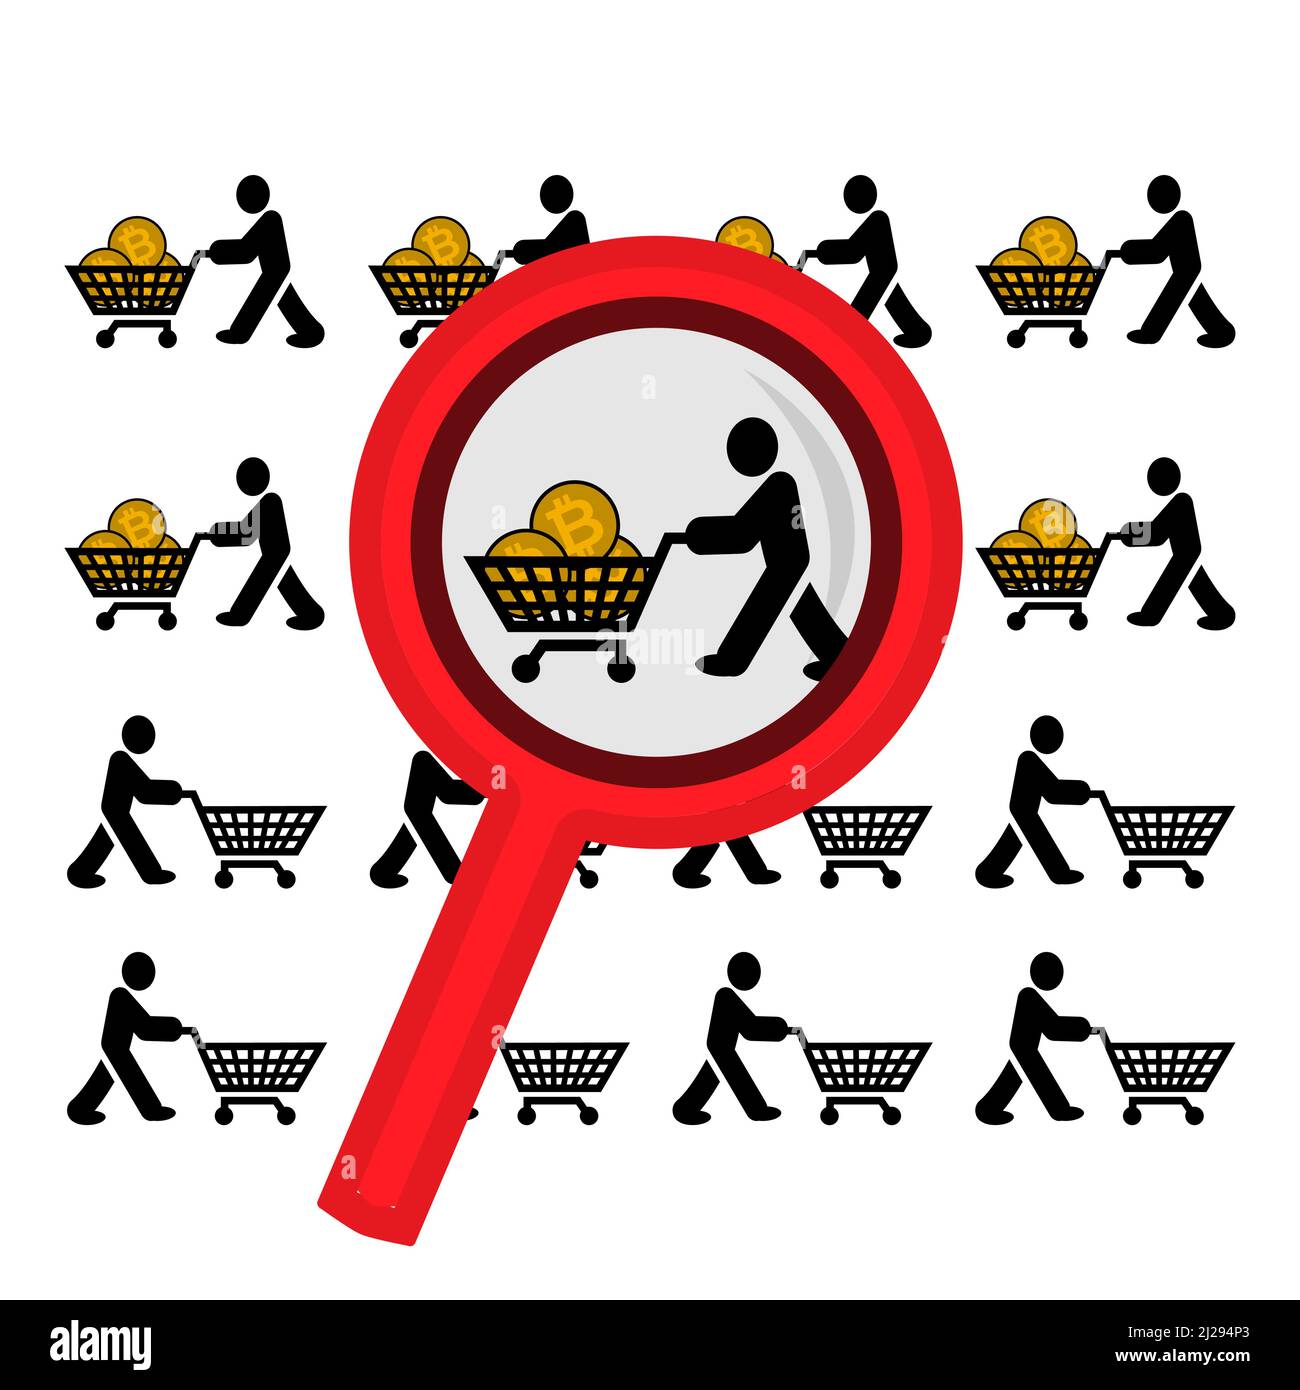 Illustration of people flocking to buy bitcoin. Vector illustration on white background. Stock Vector